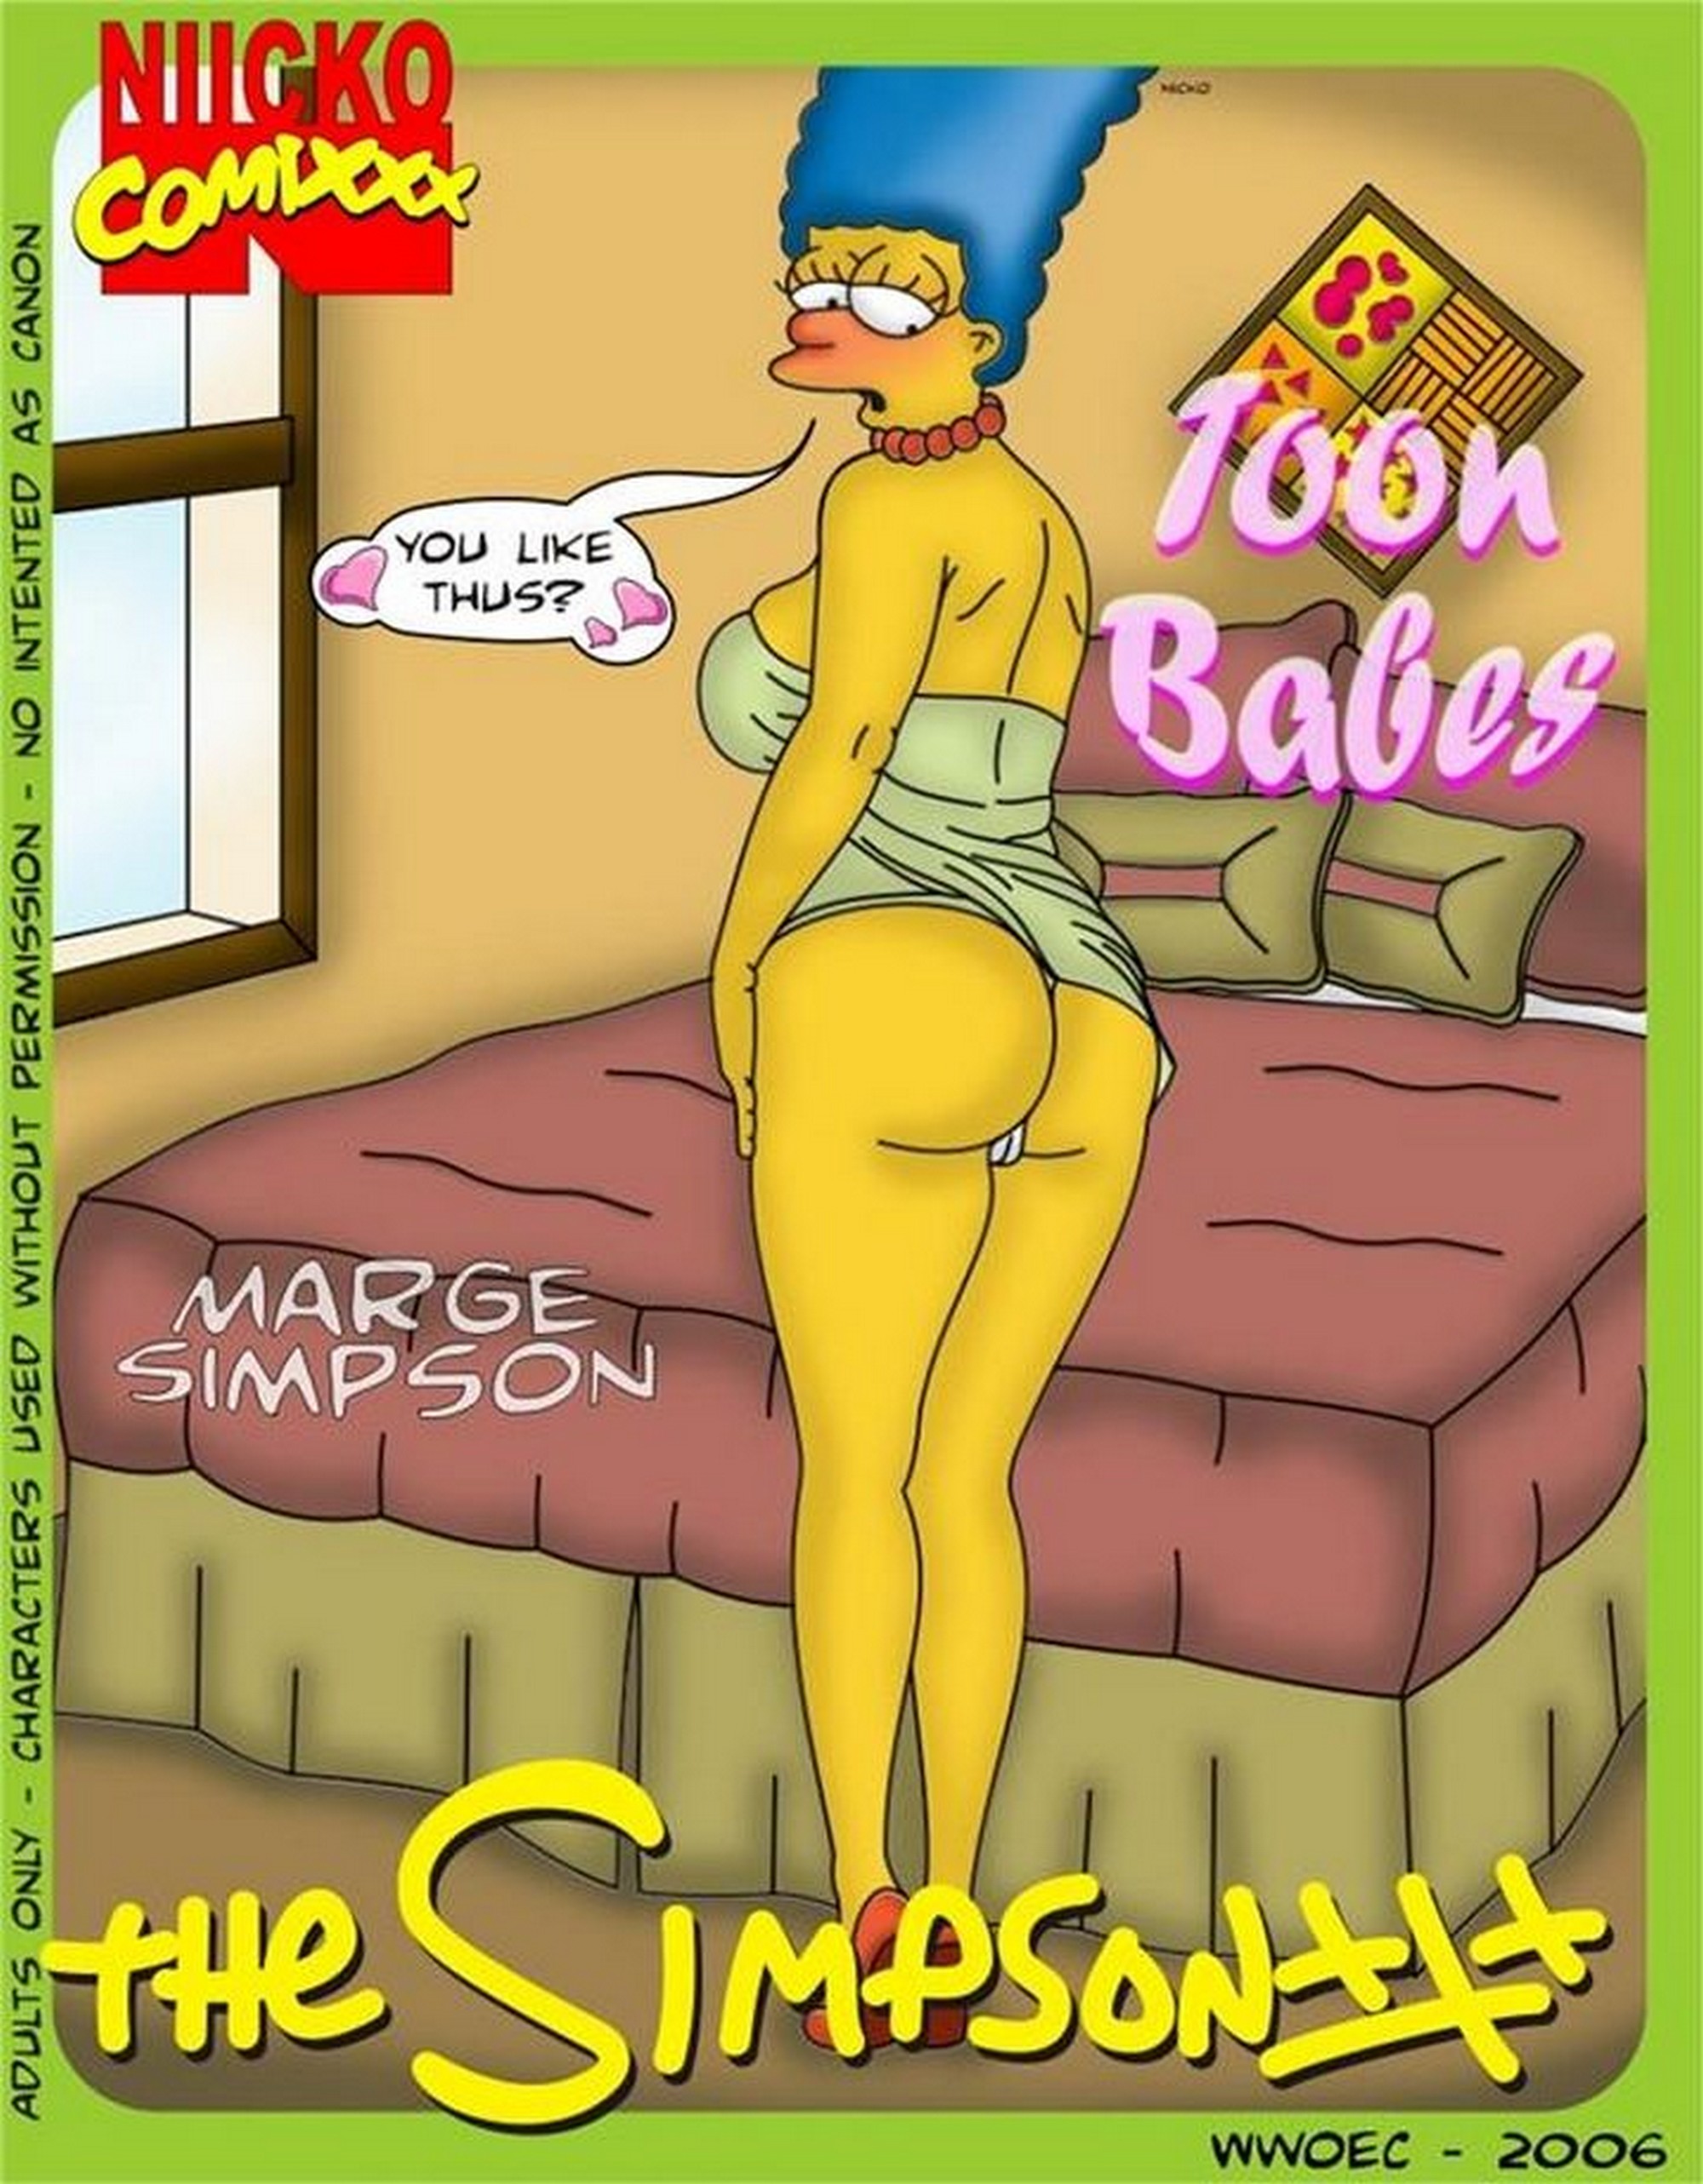 Marge Simpson Toon Babes 01